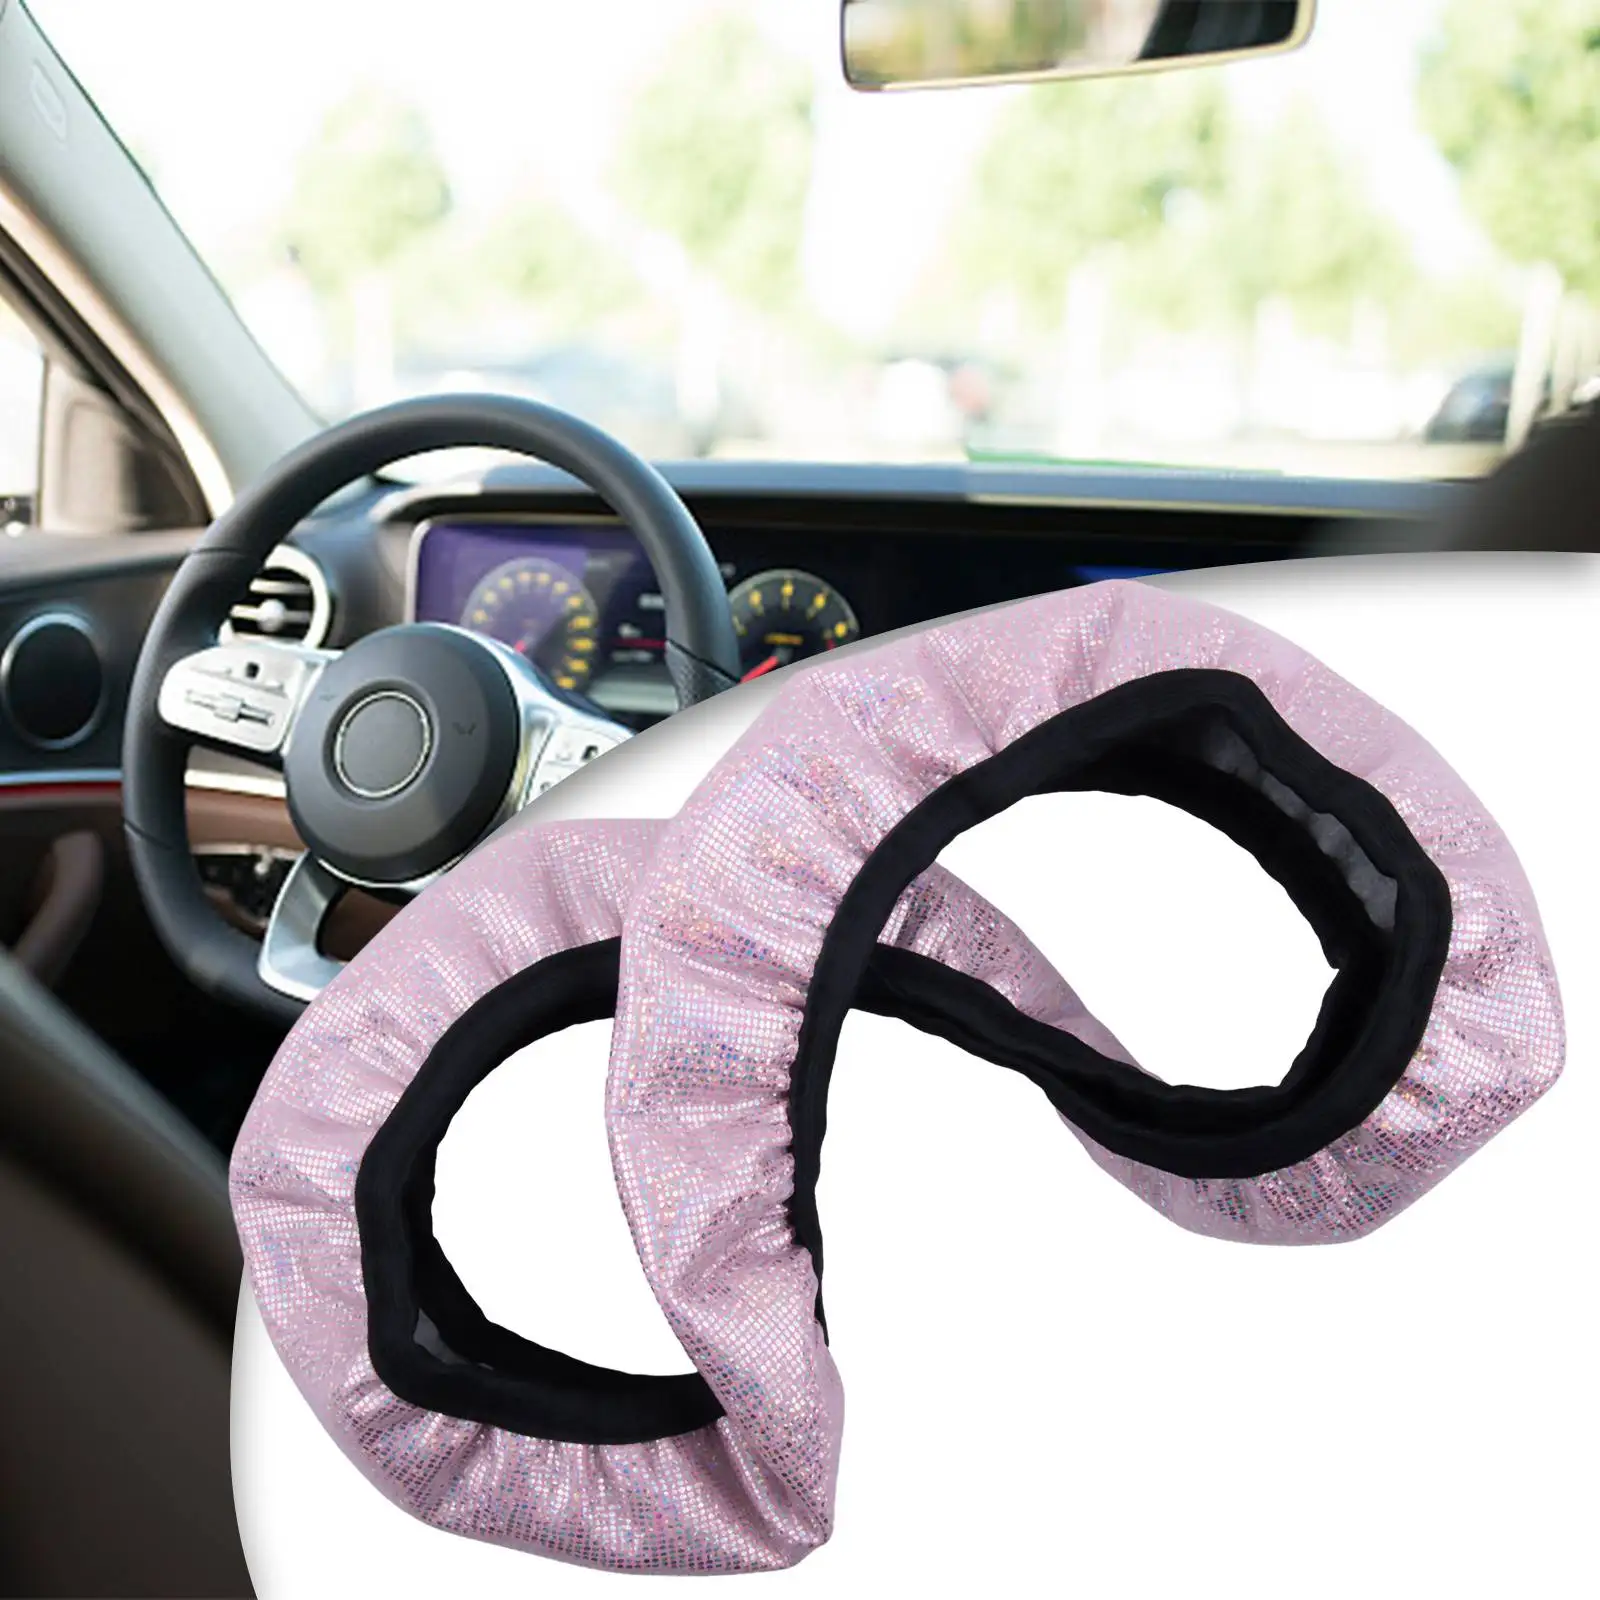 

Brand New Steering Wheel Cover Handbrake Cover *Color: Pink Soft 100% Brand New Spare Parts 14.56-14.96 Inches Universal